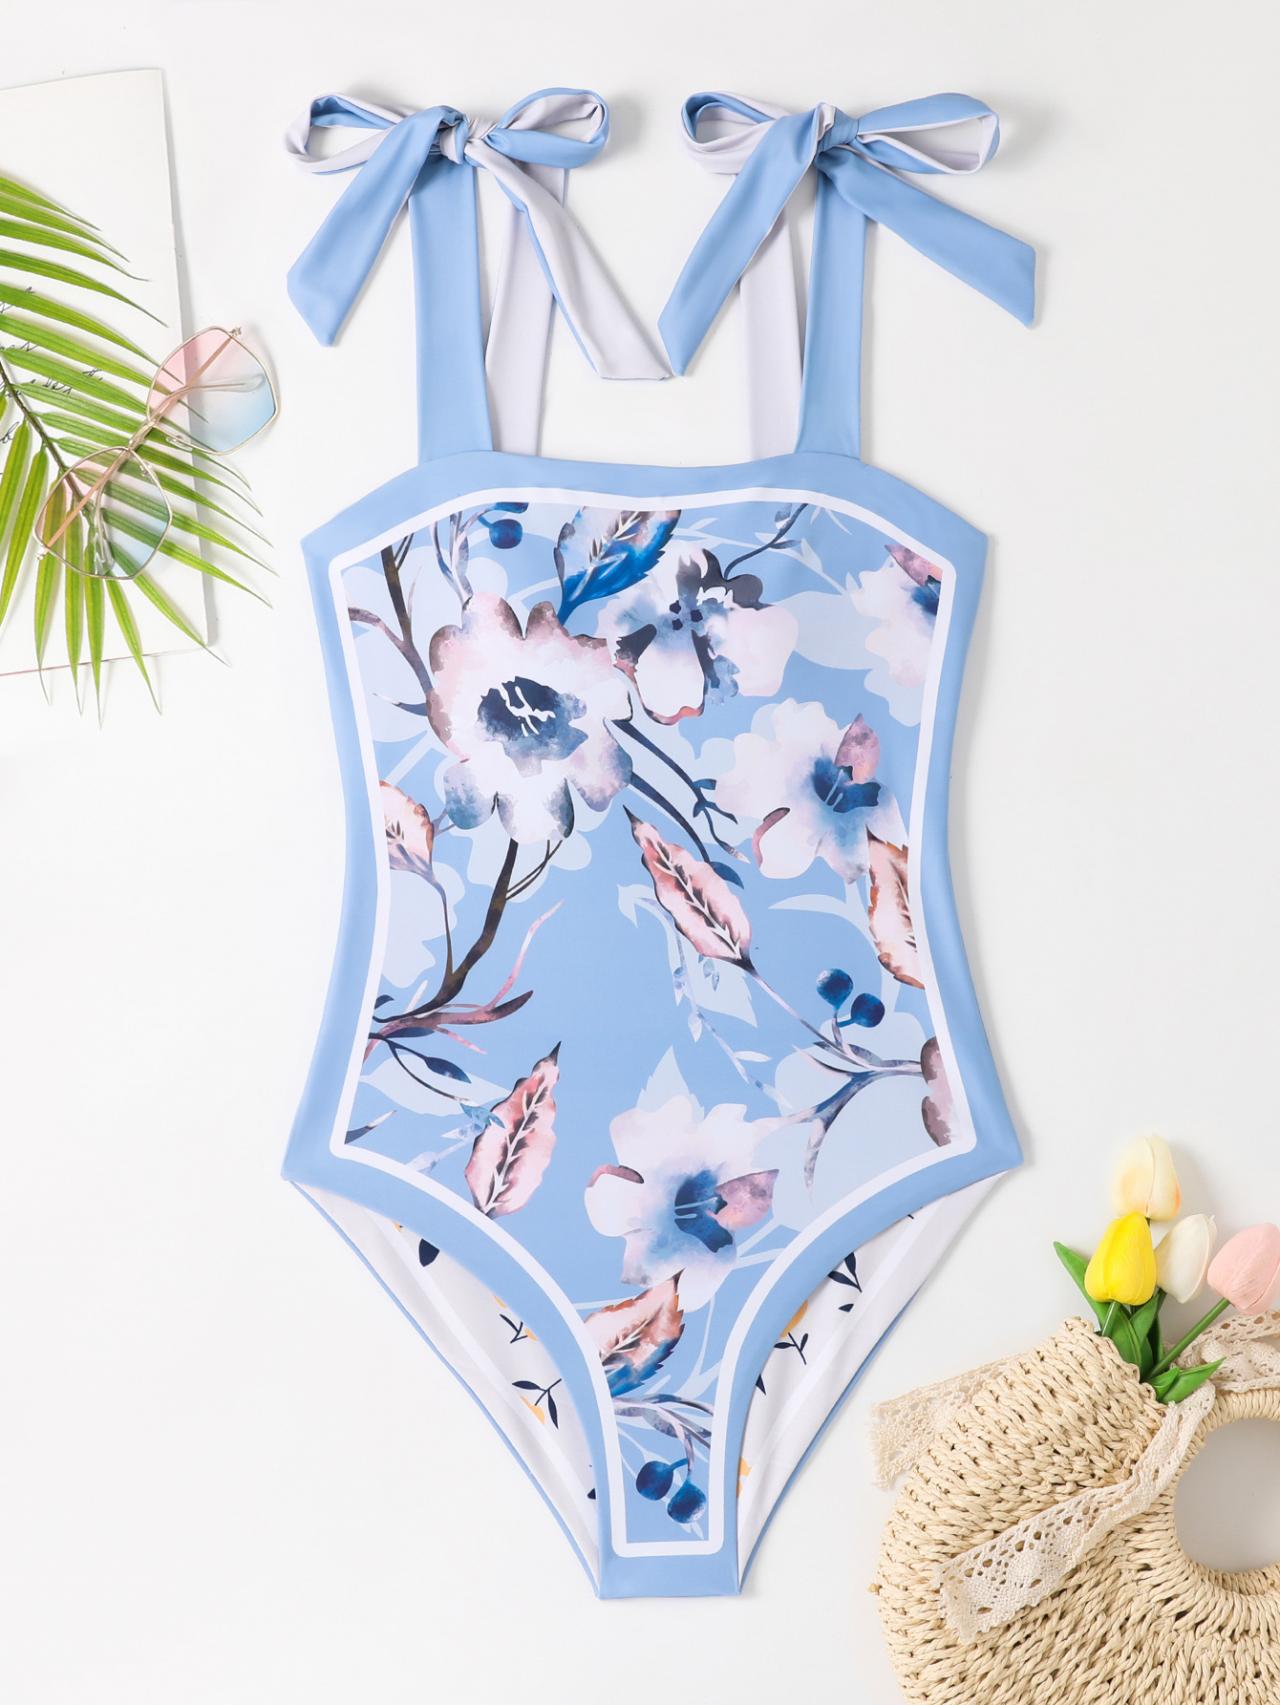 Retro One-piece Reversible Swimsuit Reversible Printed Swimsuit Sexy Lace-up Swimsuit